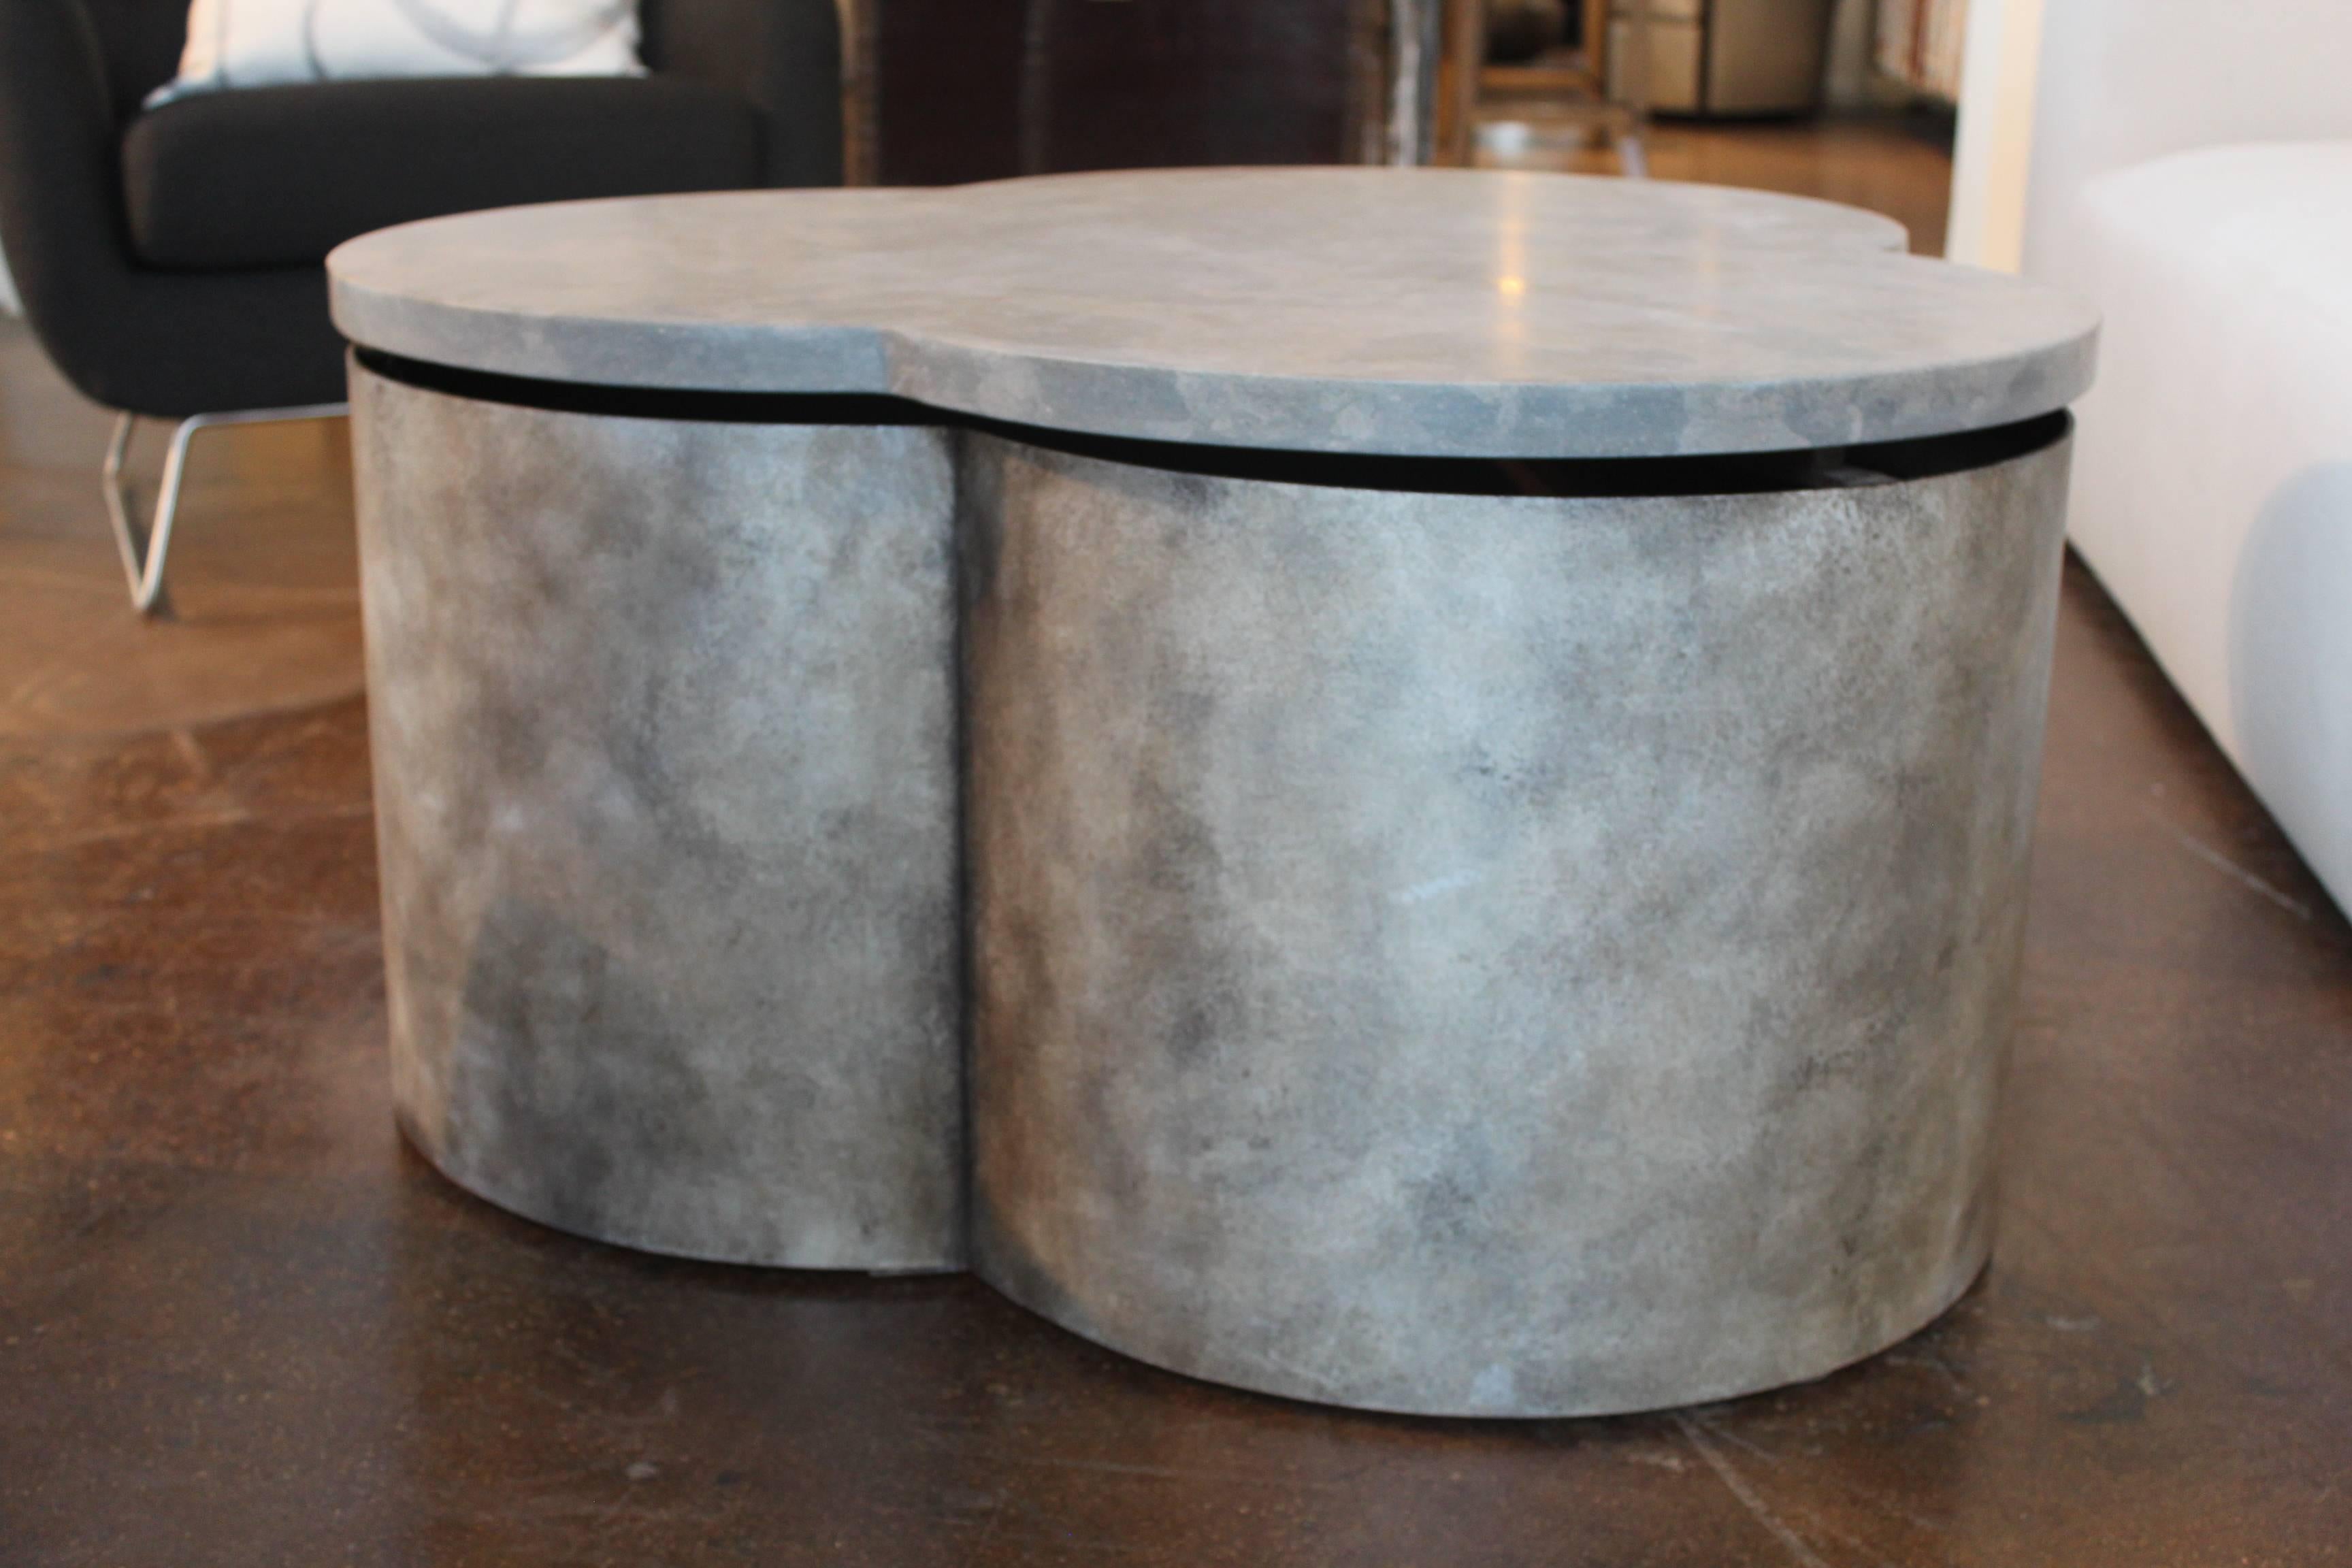 Clover design coffee table with honed Lagos Azul limestone top
Customizable
6-8 weeks.